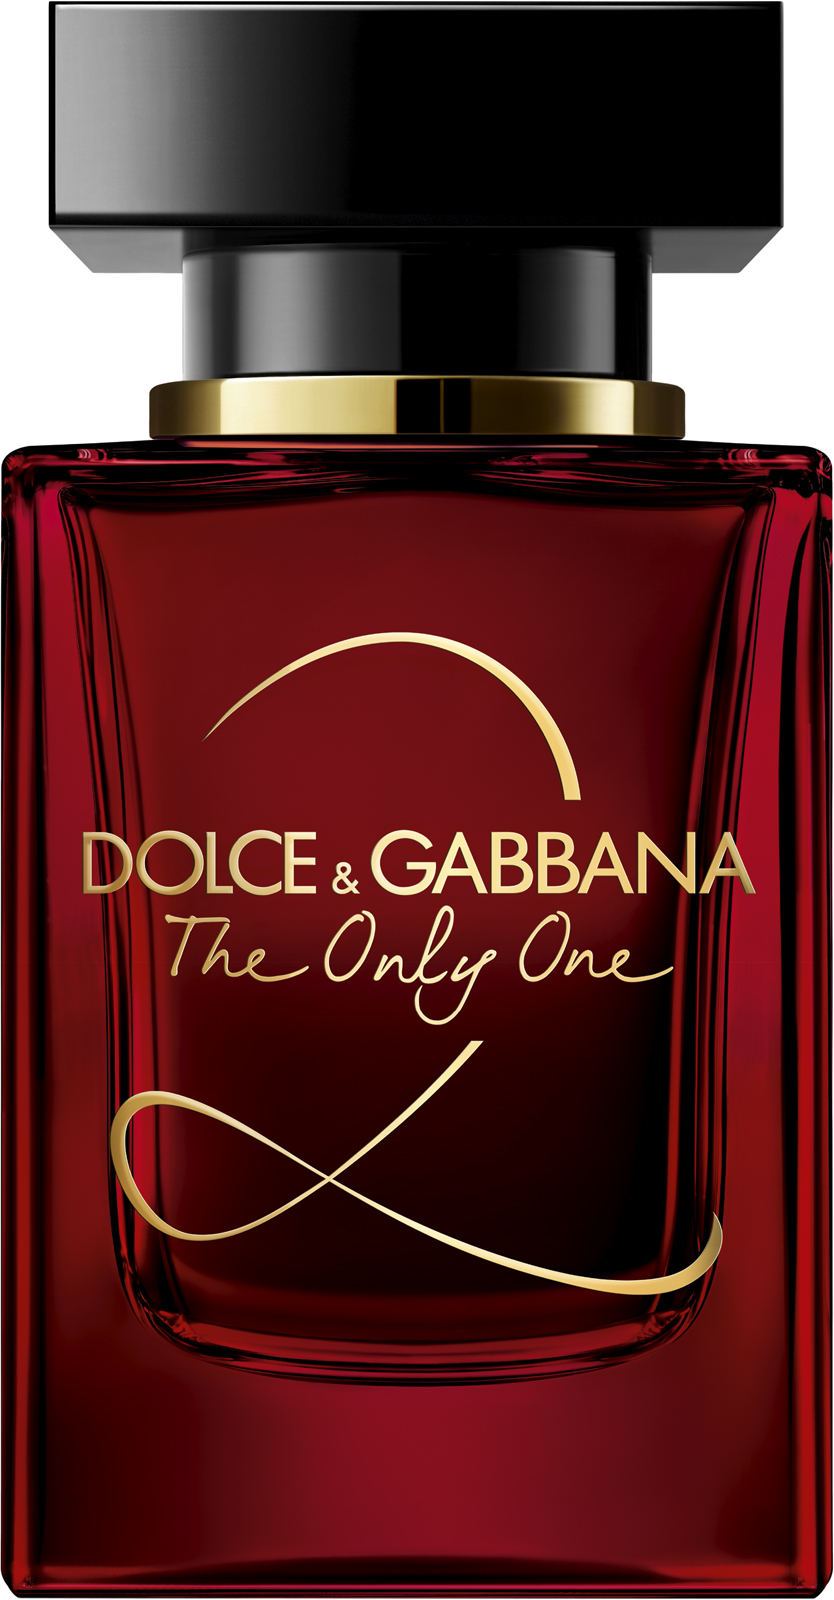 Духи dolce only one. Dolce& Gabbana the only one 2 EDP, 100 ml. Dolce Gabbana the only one 30 мл. Dolce Gabbana the only one 2 100 мл. Dolce Gabbana the only one 50ml.